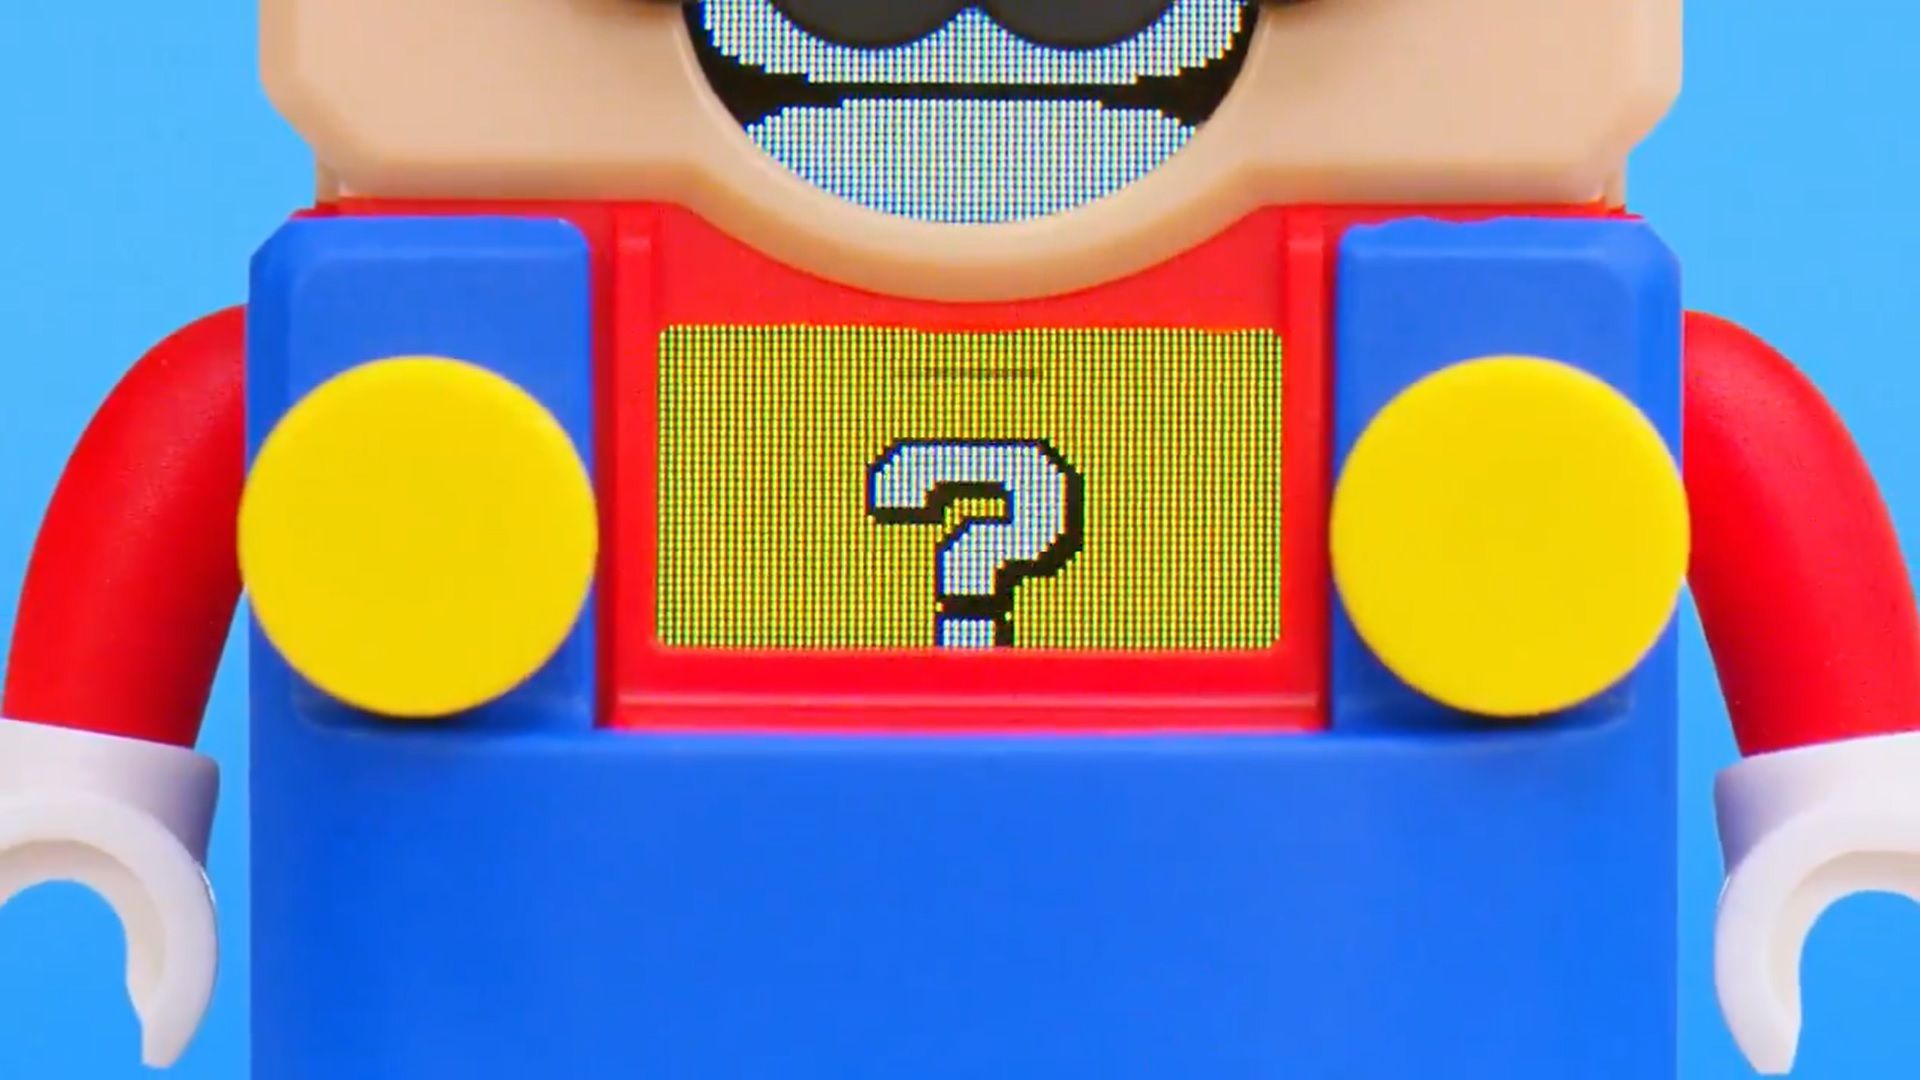 Lego Super Mario is being teased by Nintendo and the Lego Group